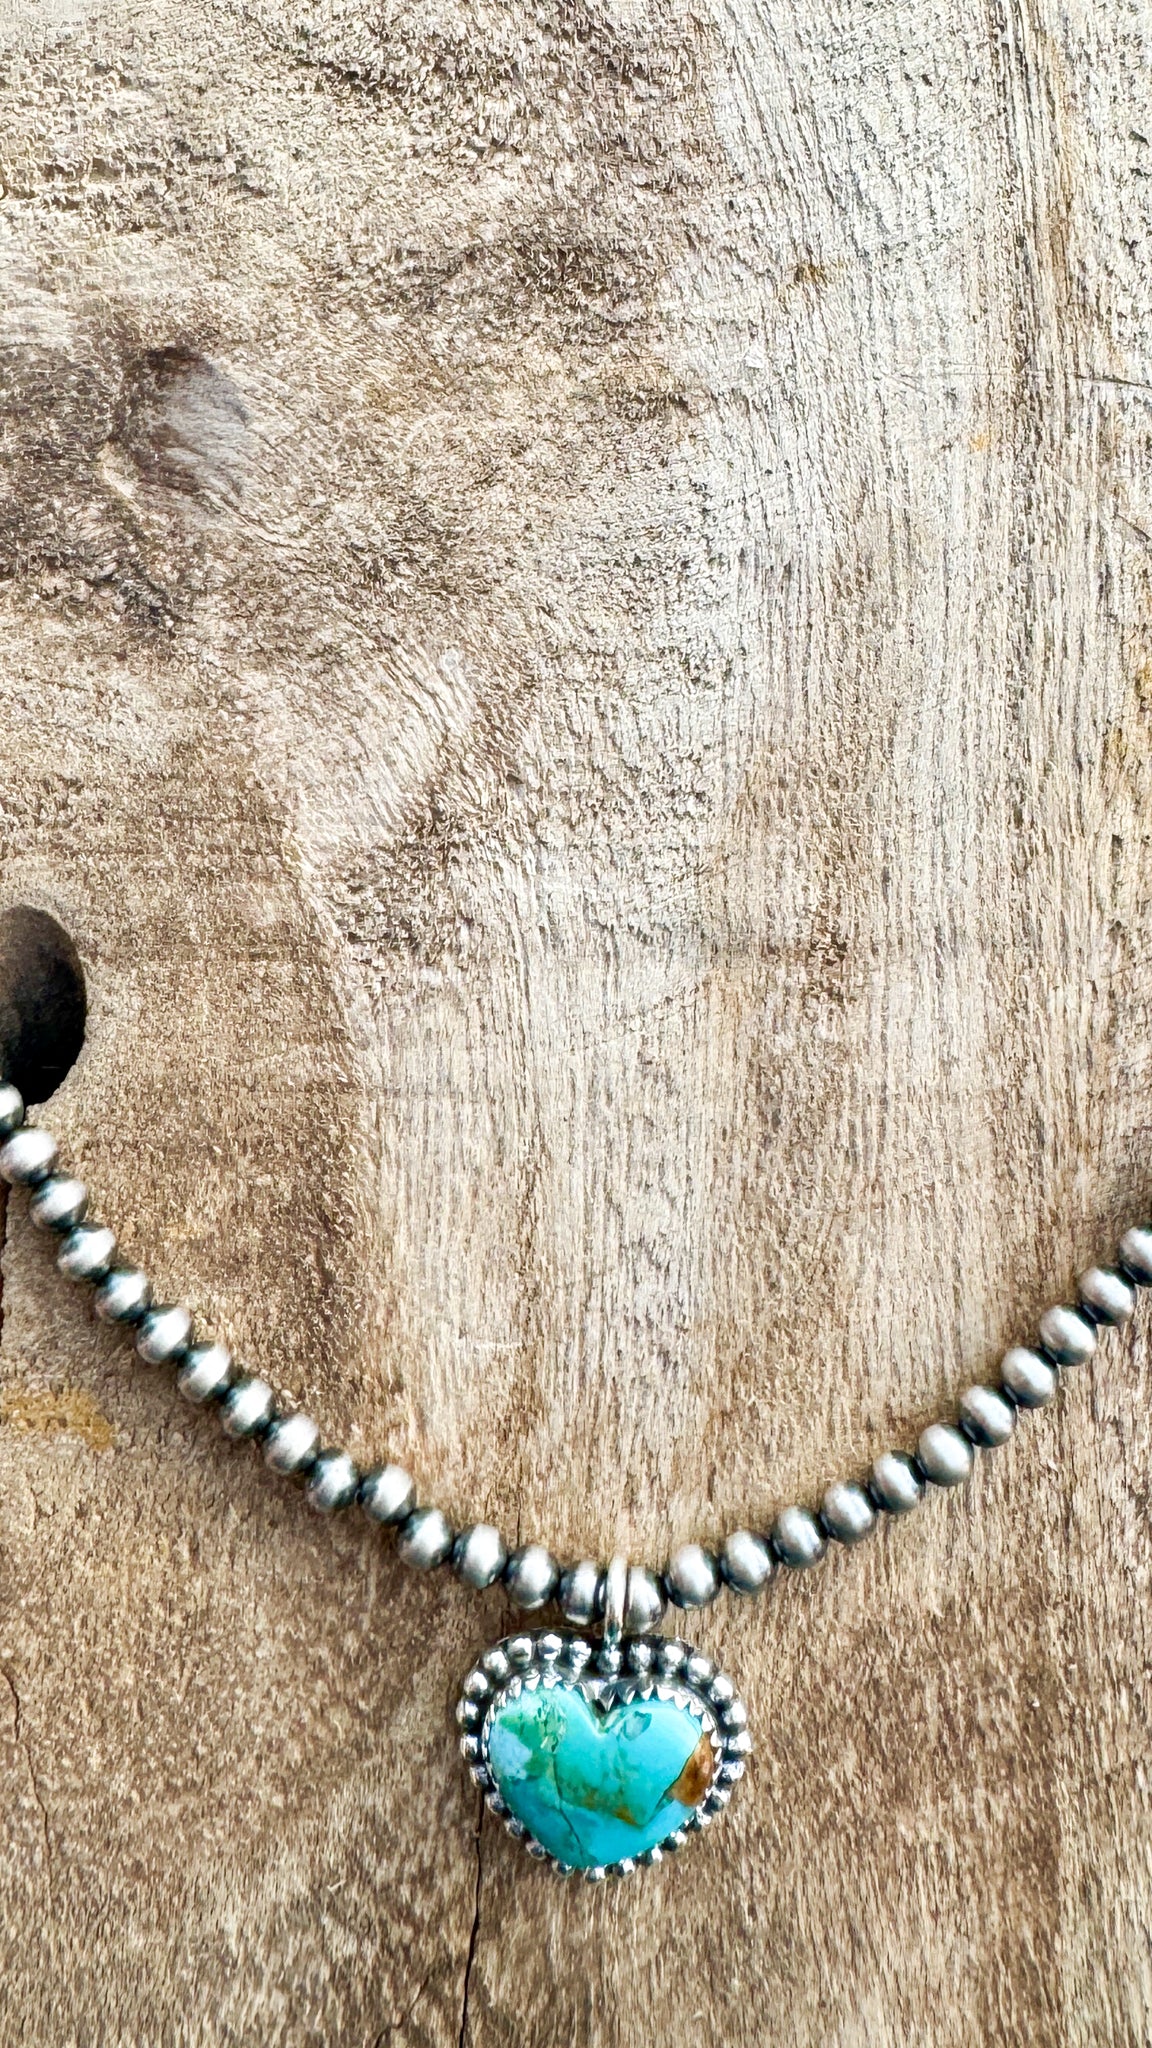 Moriarty Pearls Authentic Turquoise Necklace